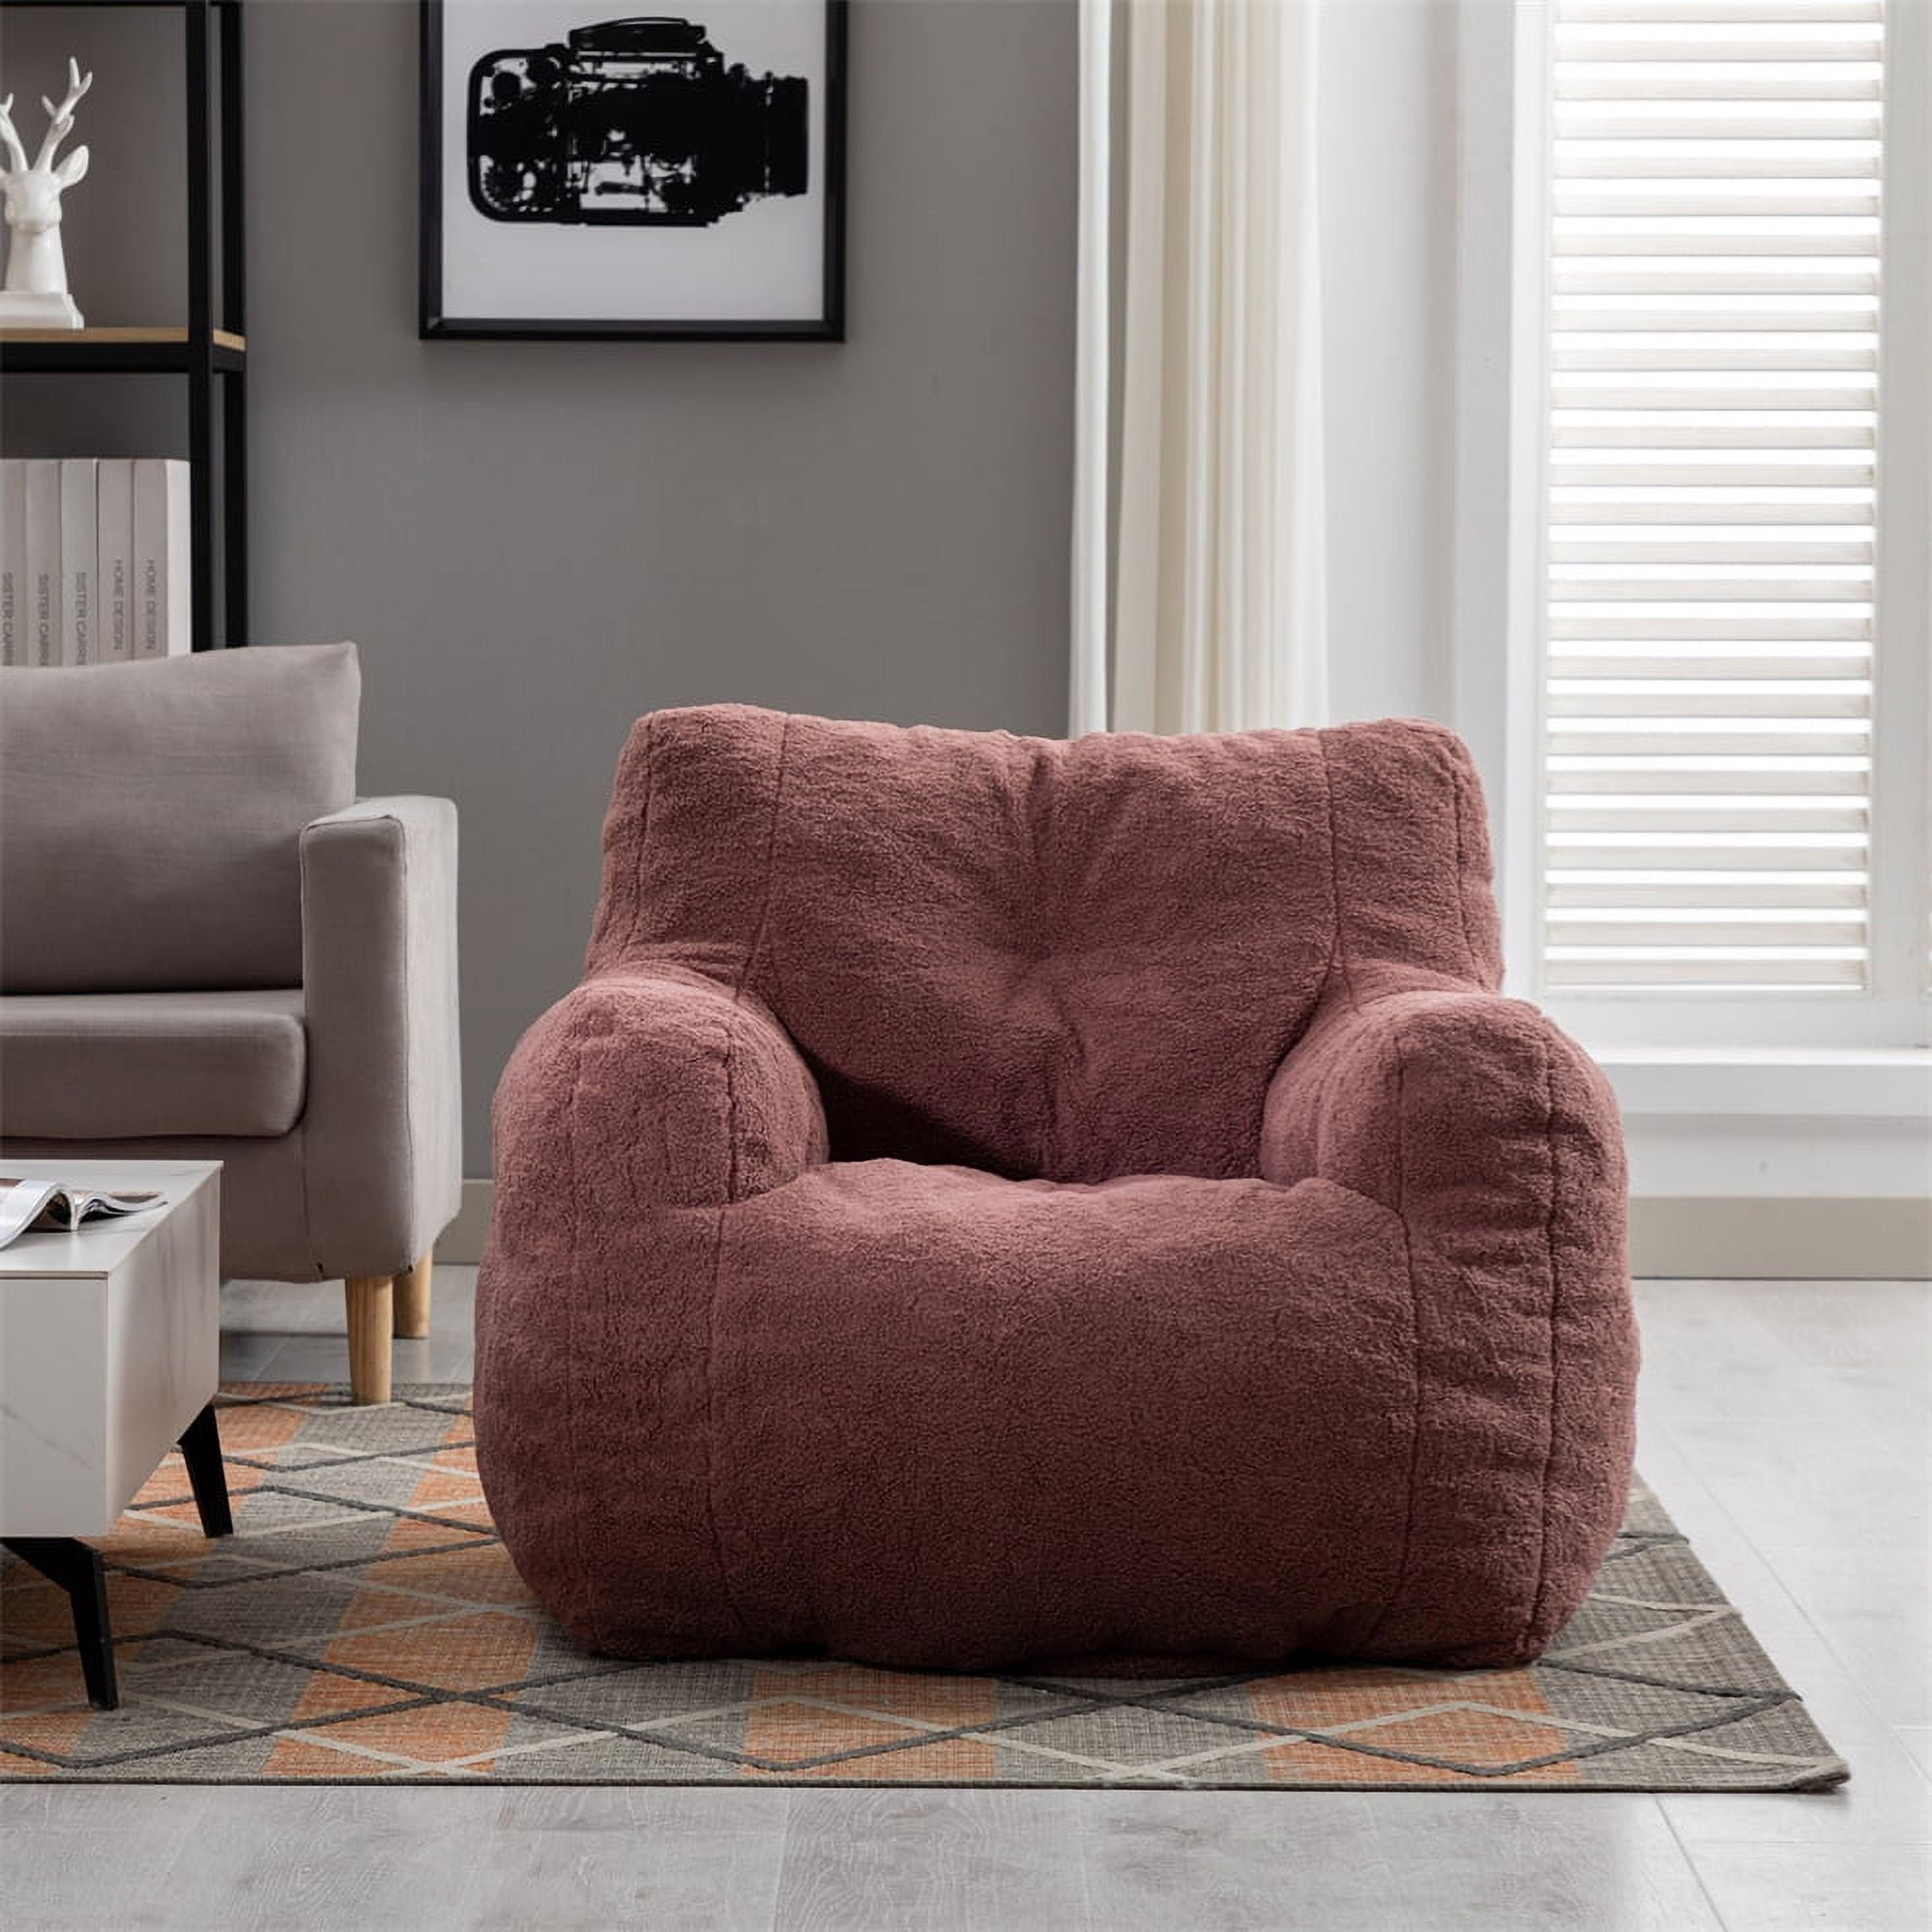 Codi Comfy Bean Bag Chair for Bedroom, Giant Beanbag Sofa - Large and Lazy Lounge Chairs for Adults and Teens - Fluffy Faux Fur with Memory Foam